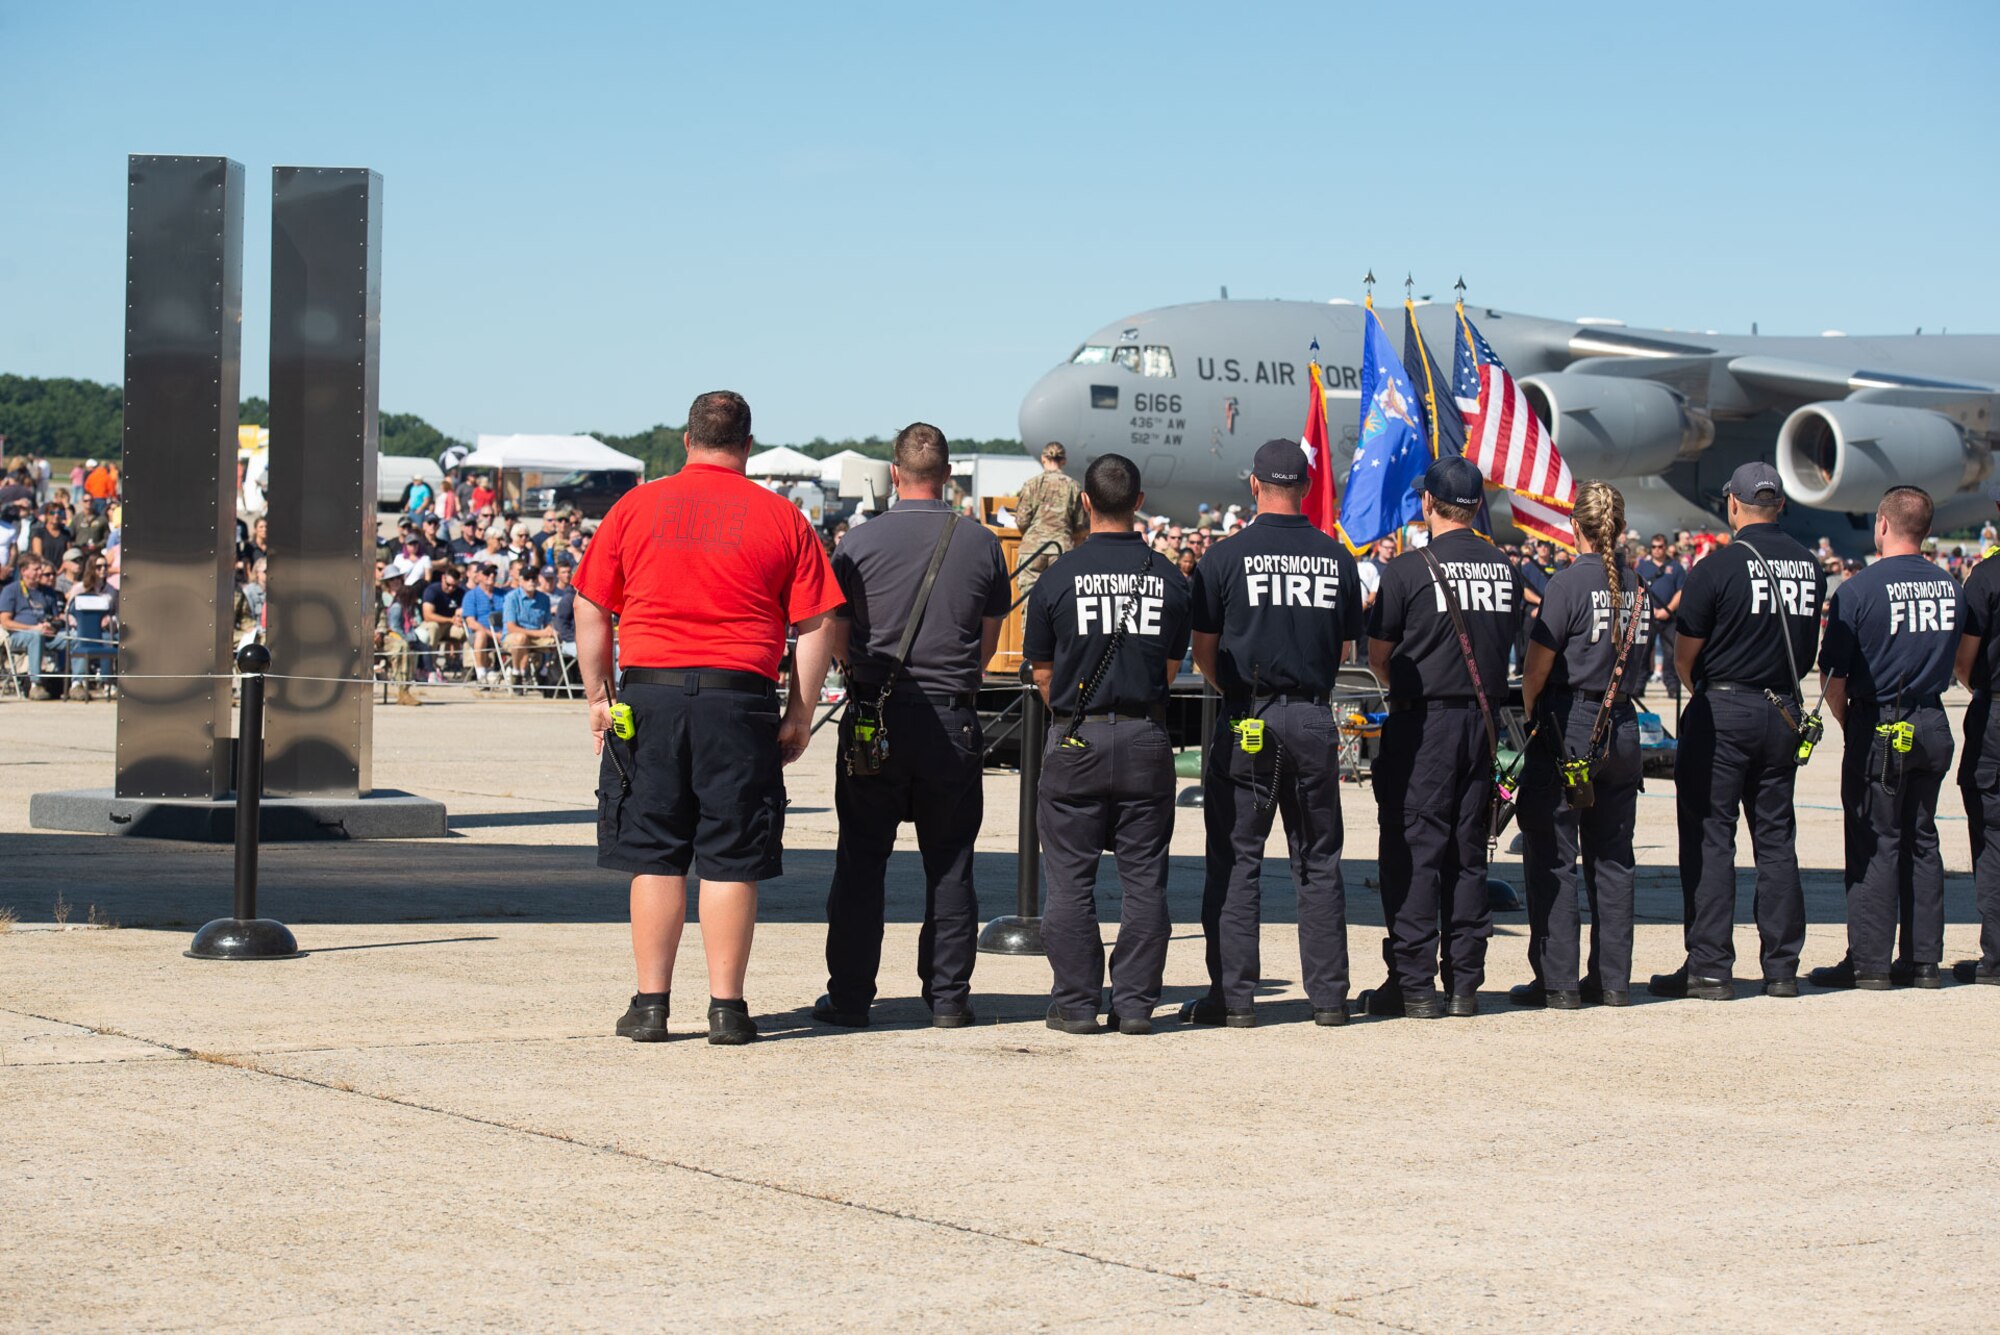 On the 20th anniversary of the 9/11 terrorist attacks, the 157th Air Refueling Wing and those in attendance for the ceremony, pay tribute the men and women who lost their lives that unforgettable day. Today, we honor the resilience of the American spirit and share in the remembrance of this day. We are grateful for the sacrifice, bravery and dedication our fellow Americans have shown to ensure the safety of our beloved country. May the service of these men and women continue to inspire hope and unity for future generations. (U.S. Air National Guard photo by Staff Sgt. Victoria Nelson)